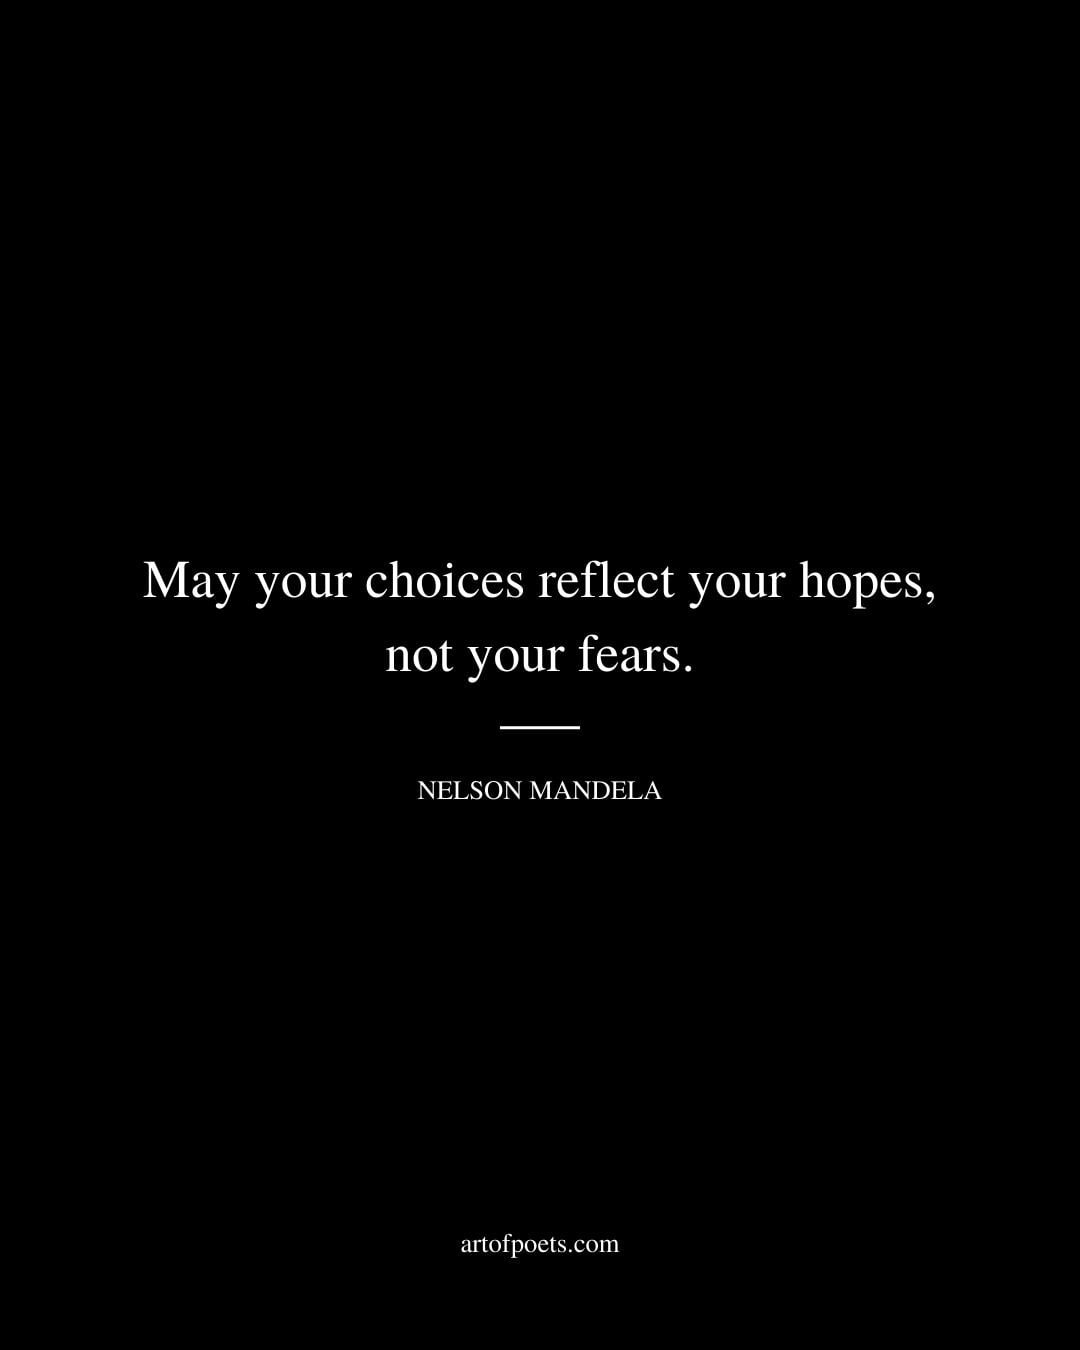 May your choices reflect your hopes not your fears. Nelson Mandela